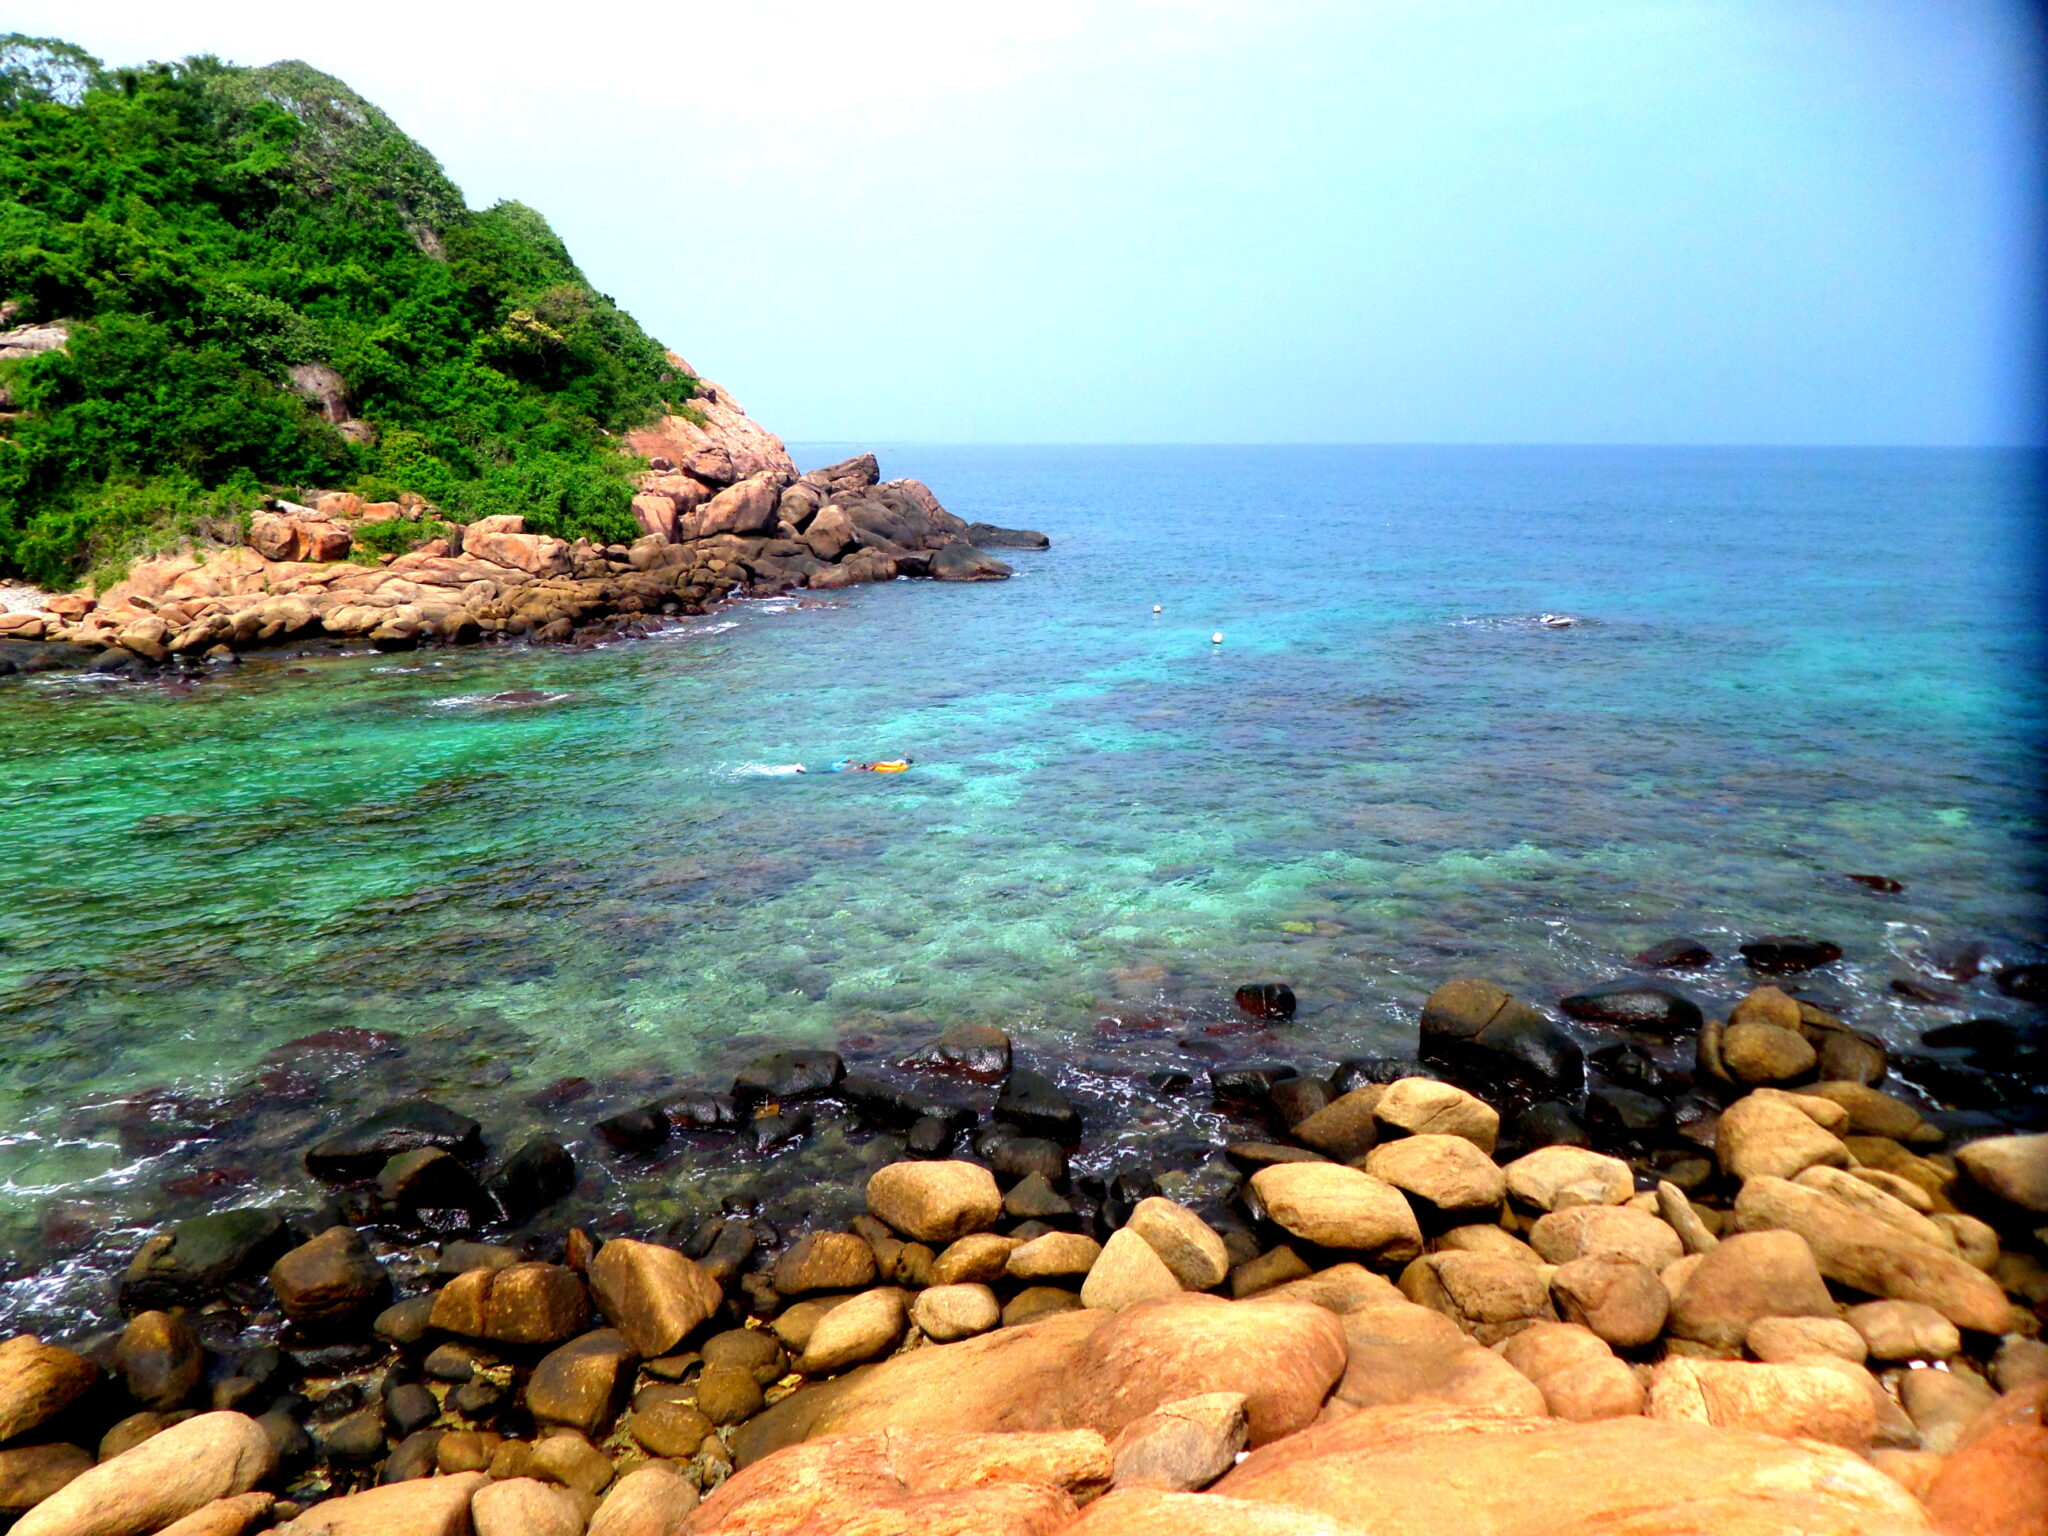 Pigeon Island National Park in Trincomalee, one of two marine national parks in the country and a popular scuba destination